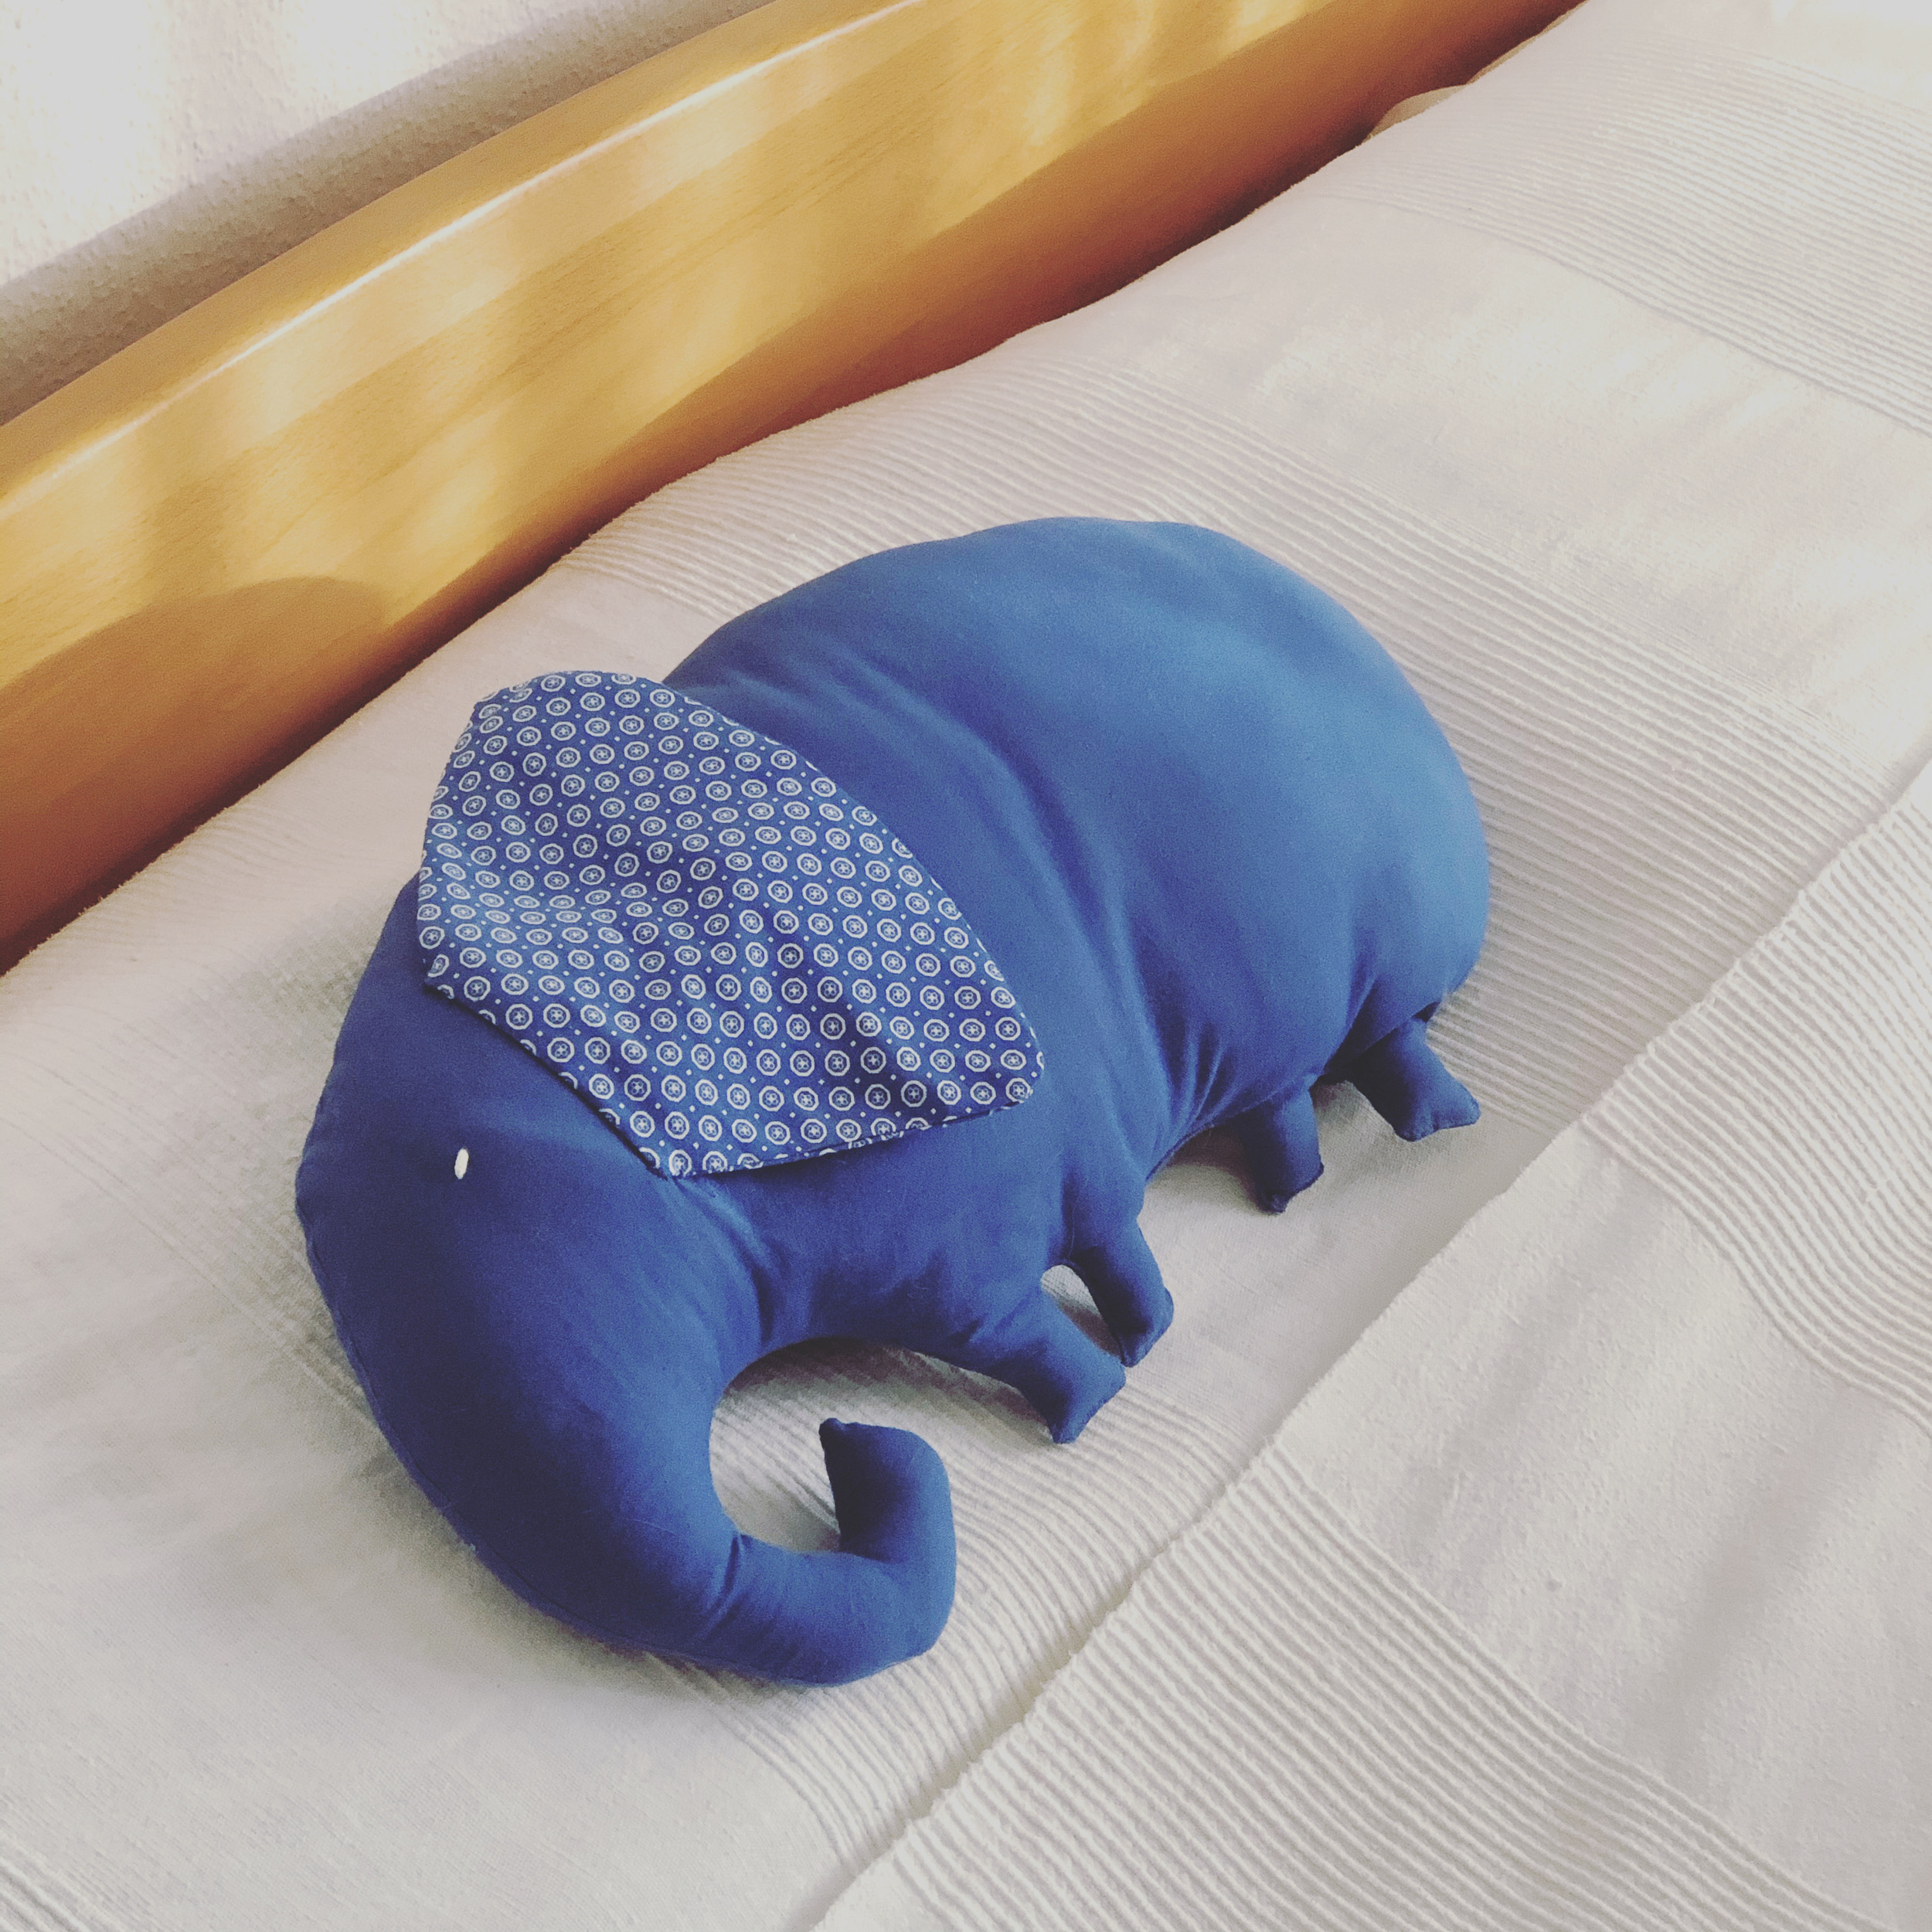 Don’t even think about a blue elephant!